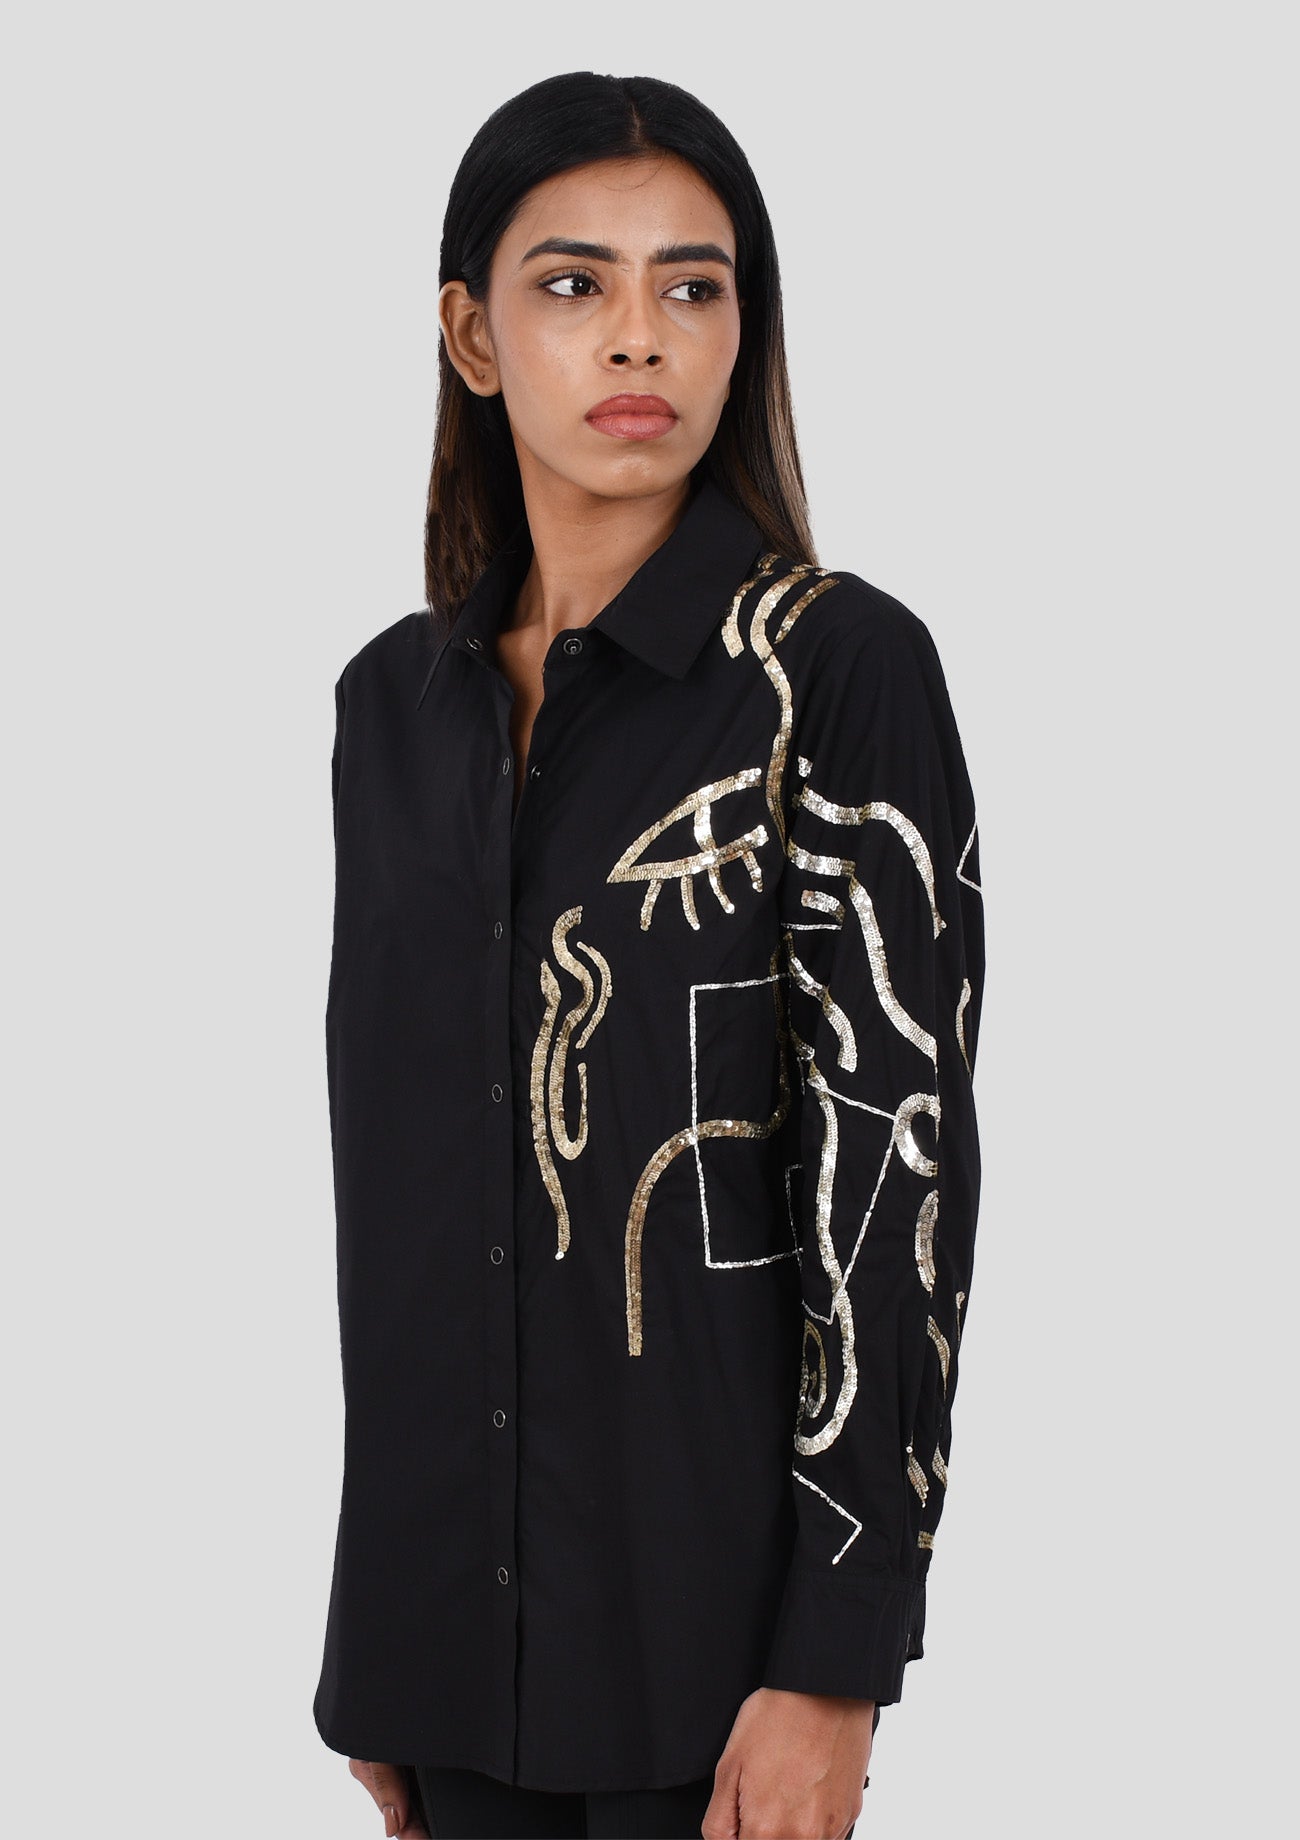 Black Cotton Shirt With Abstract Sequins Embroidery Front And Back